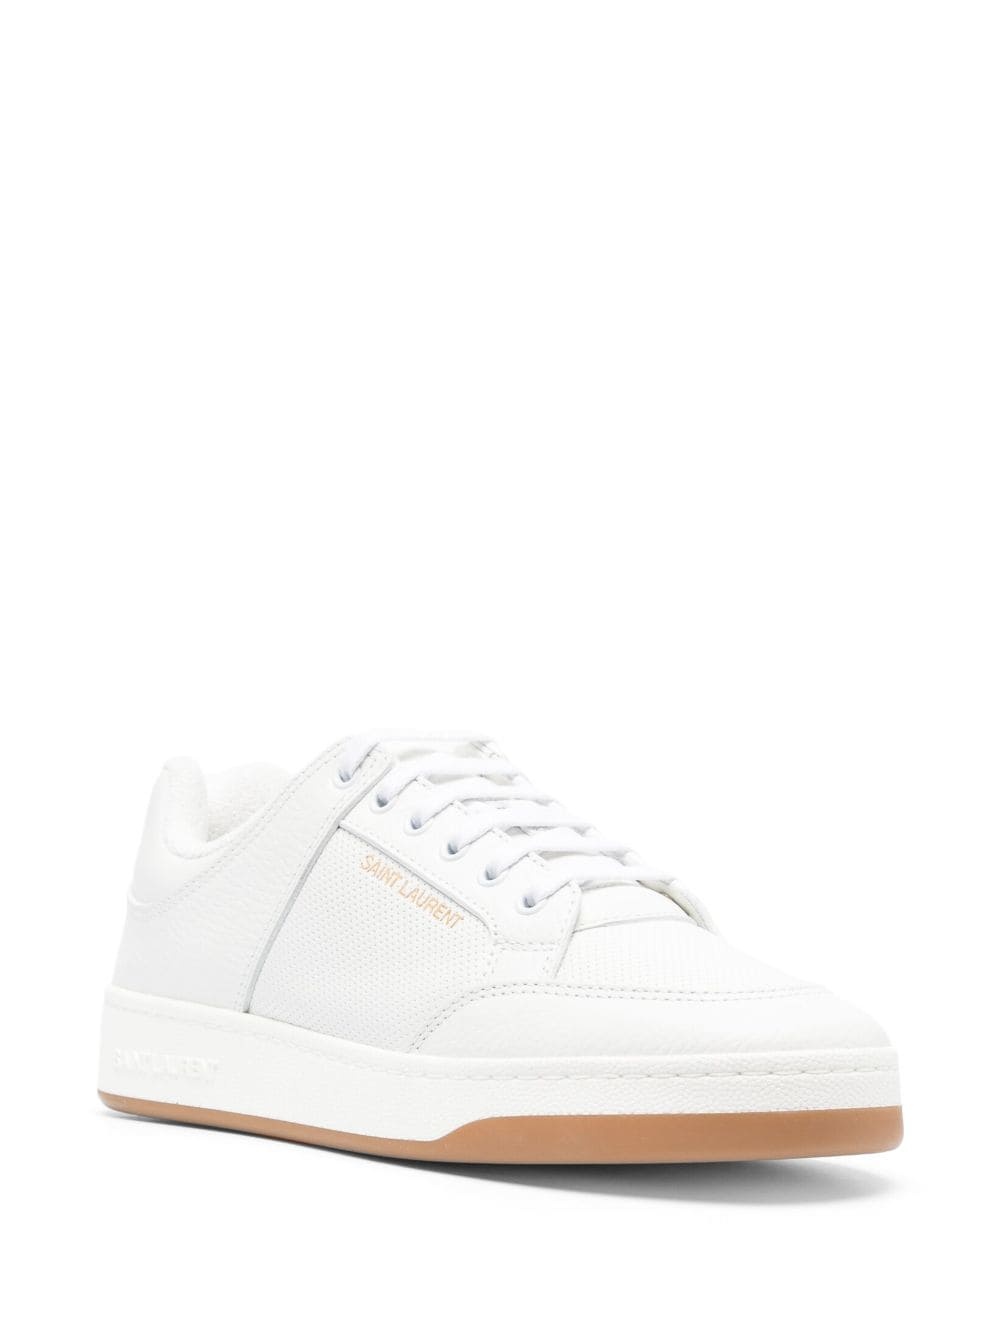 SL/61 leather perforated sneakers - 2